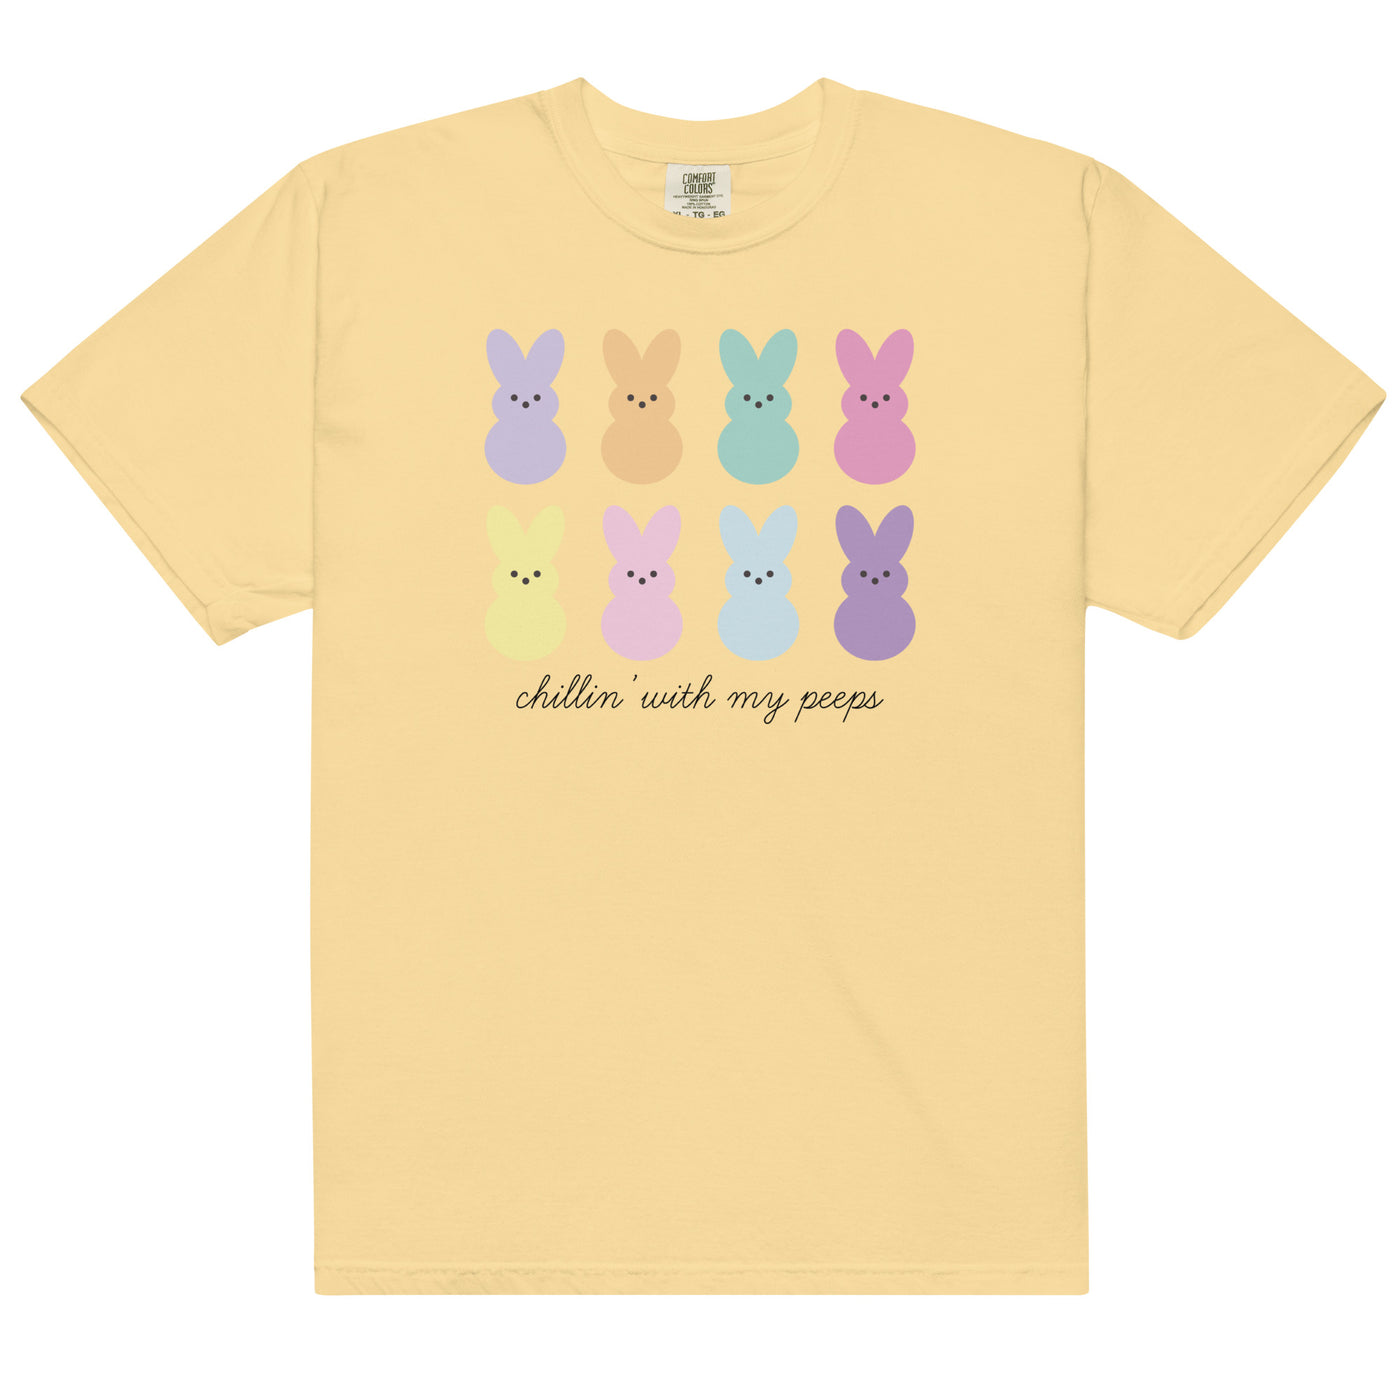 Monogrammed 'Chillin' With My Peeps' T-Shirt